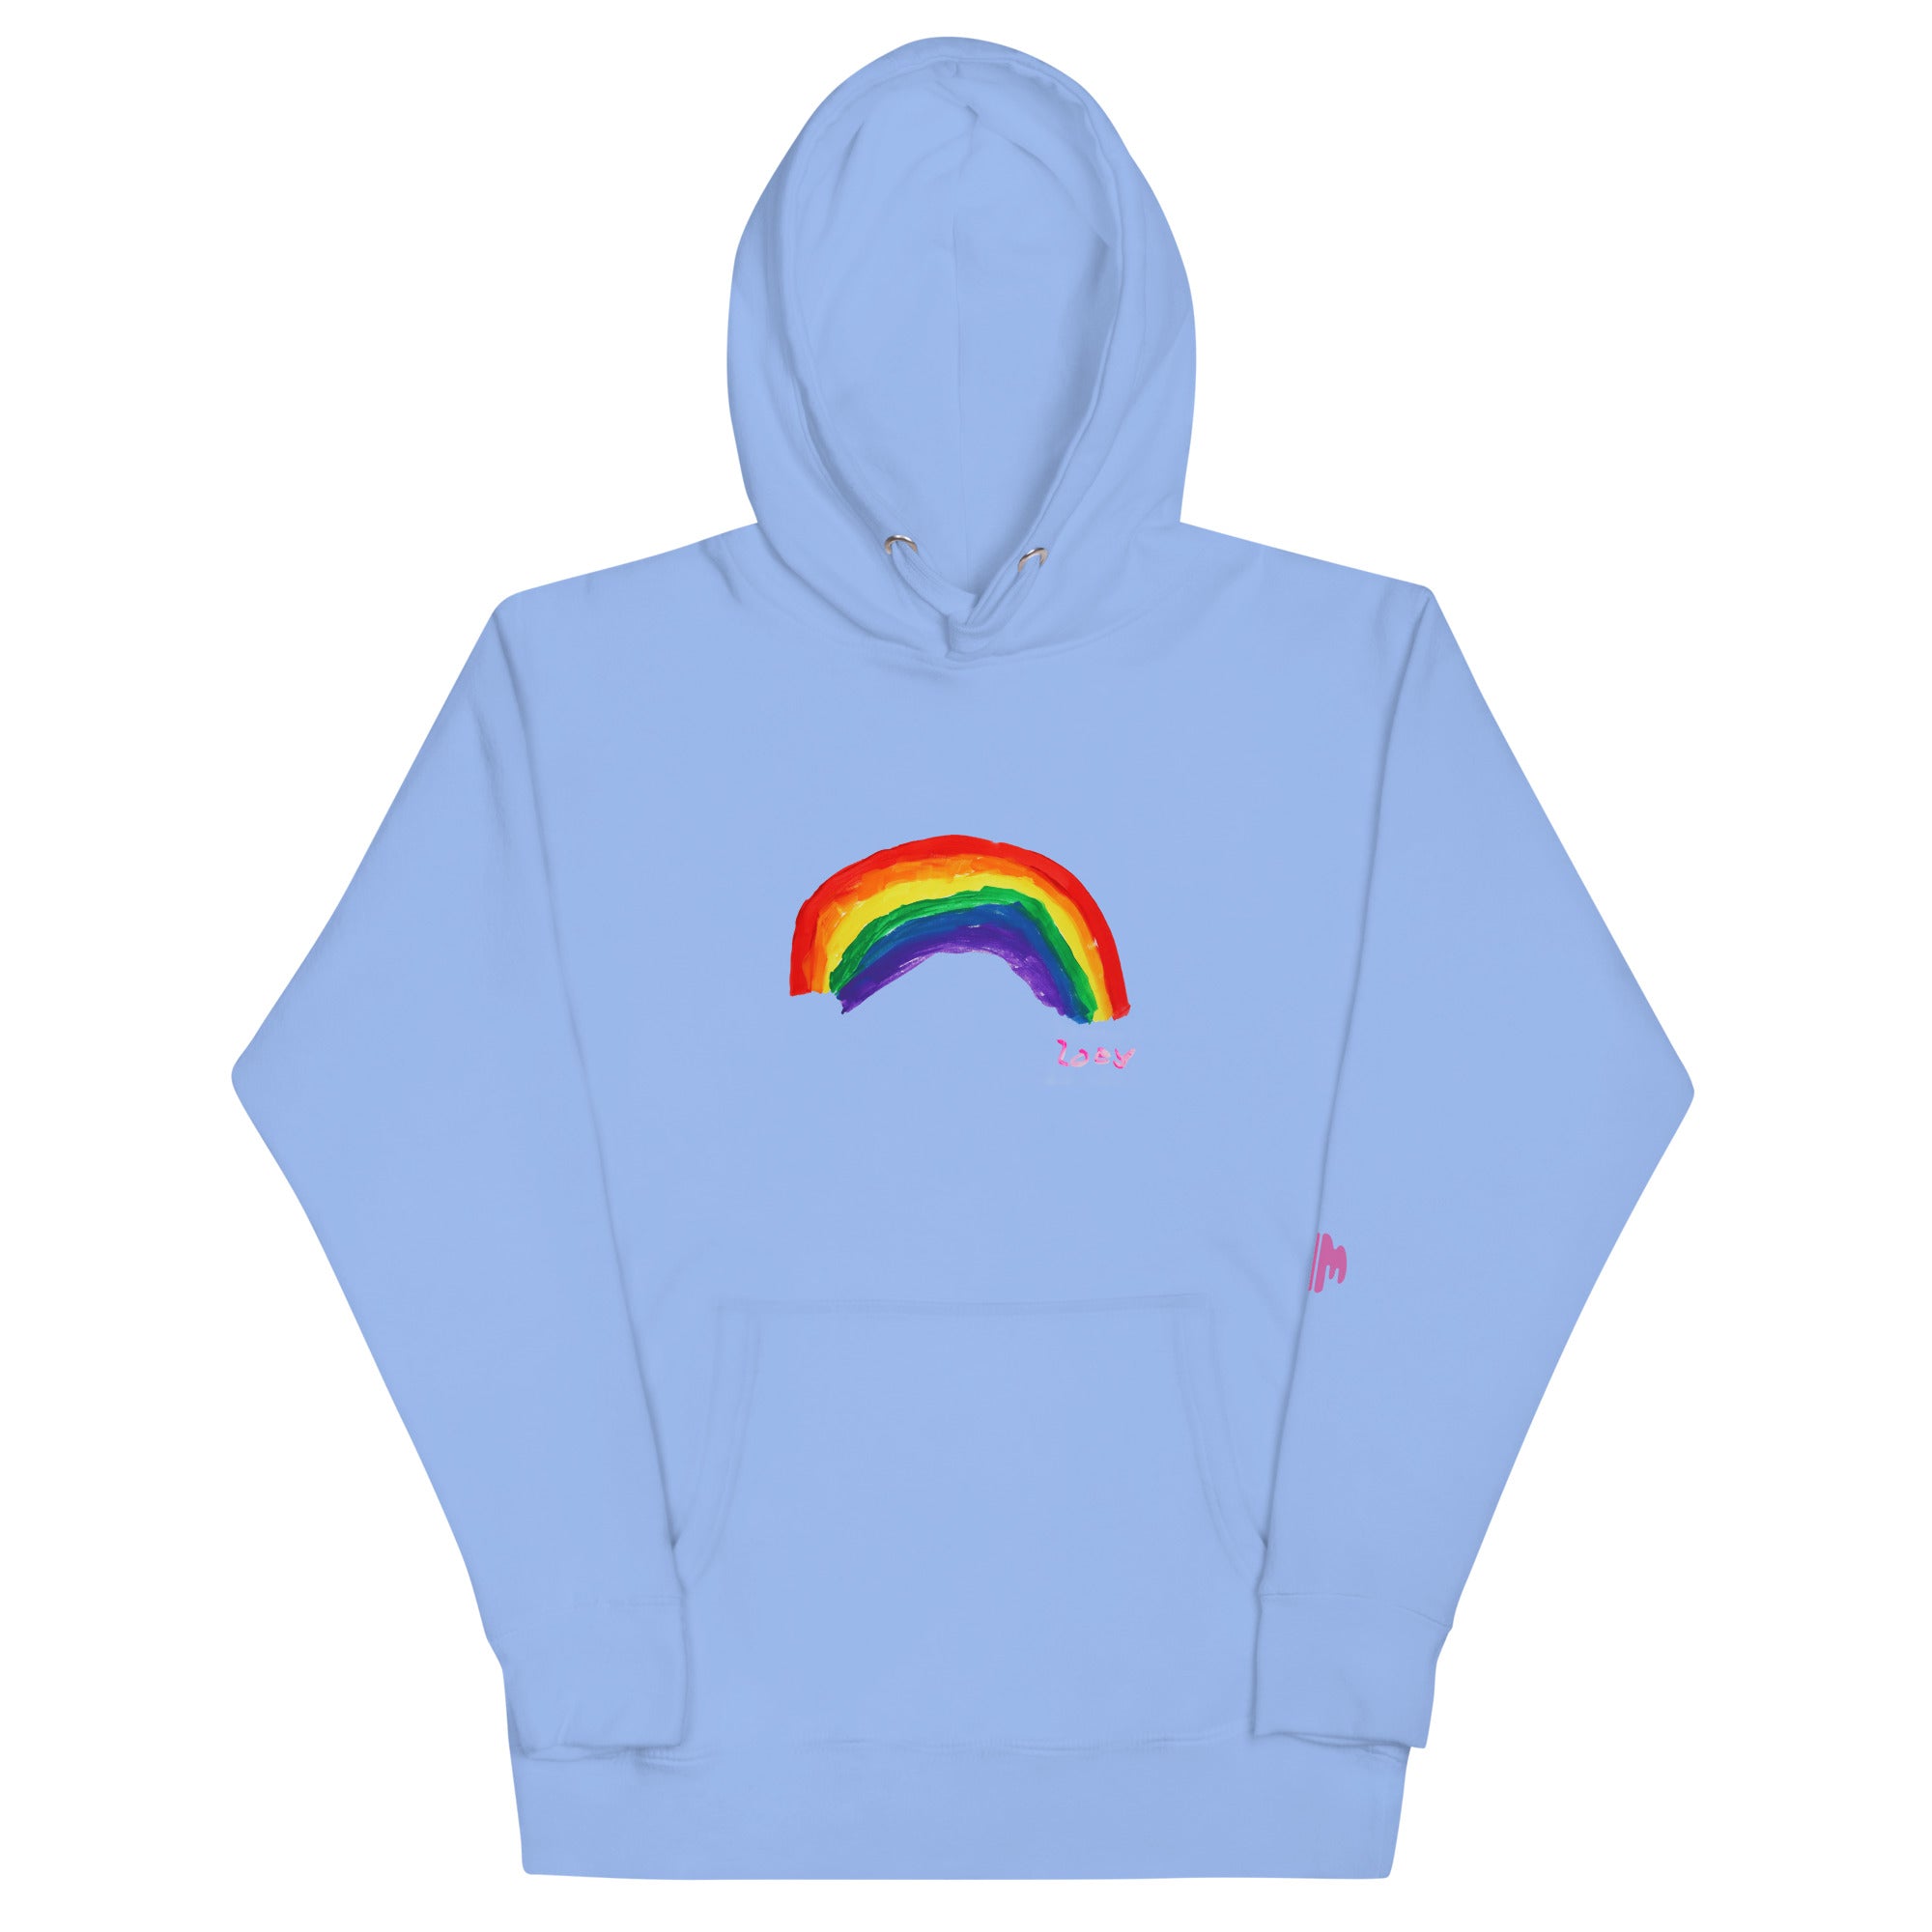 Bank Countryside Ægte Zoey's "Rainbow" Hoodie (Light blue) – Jake Max